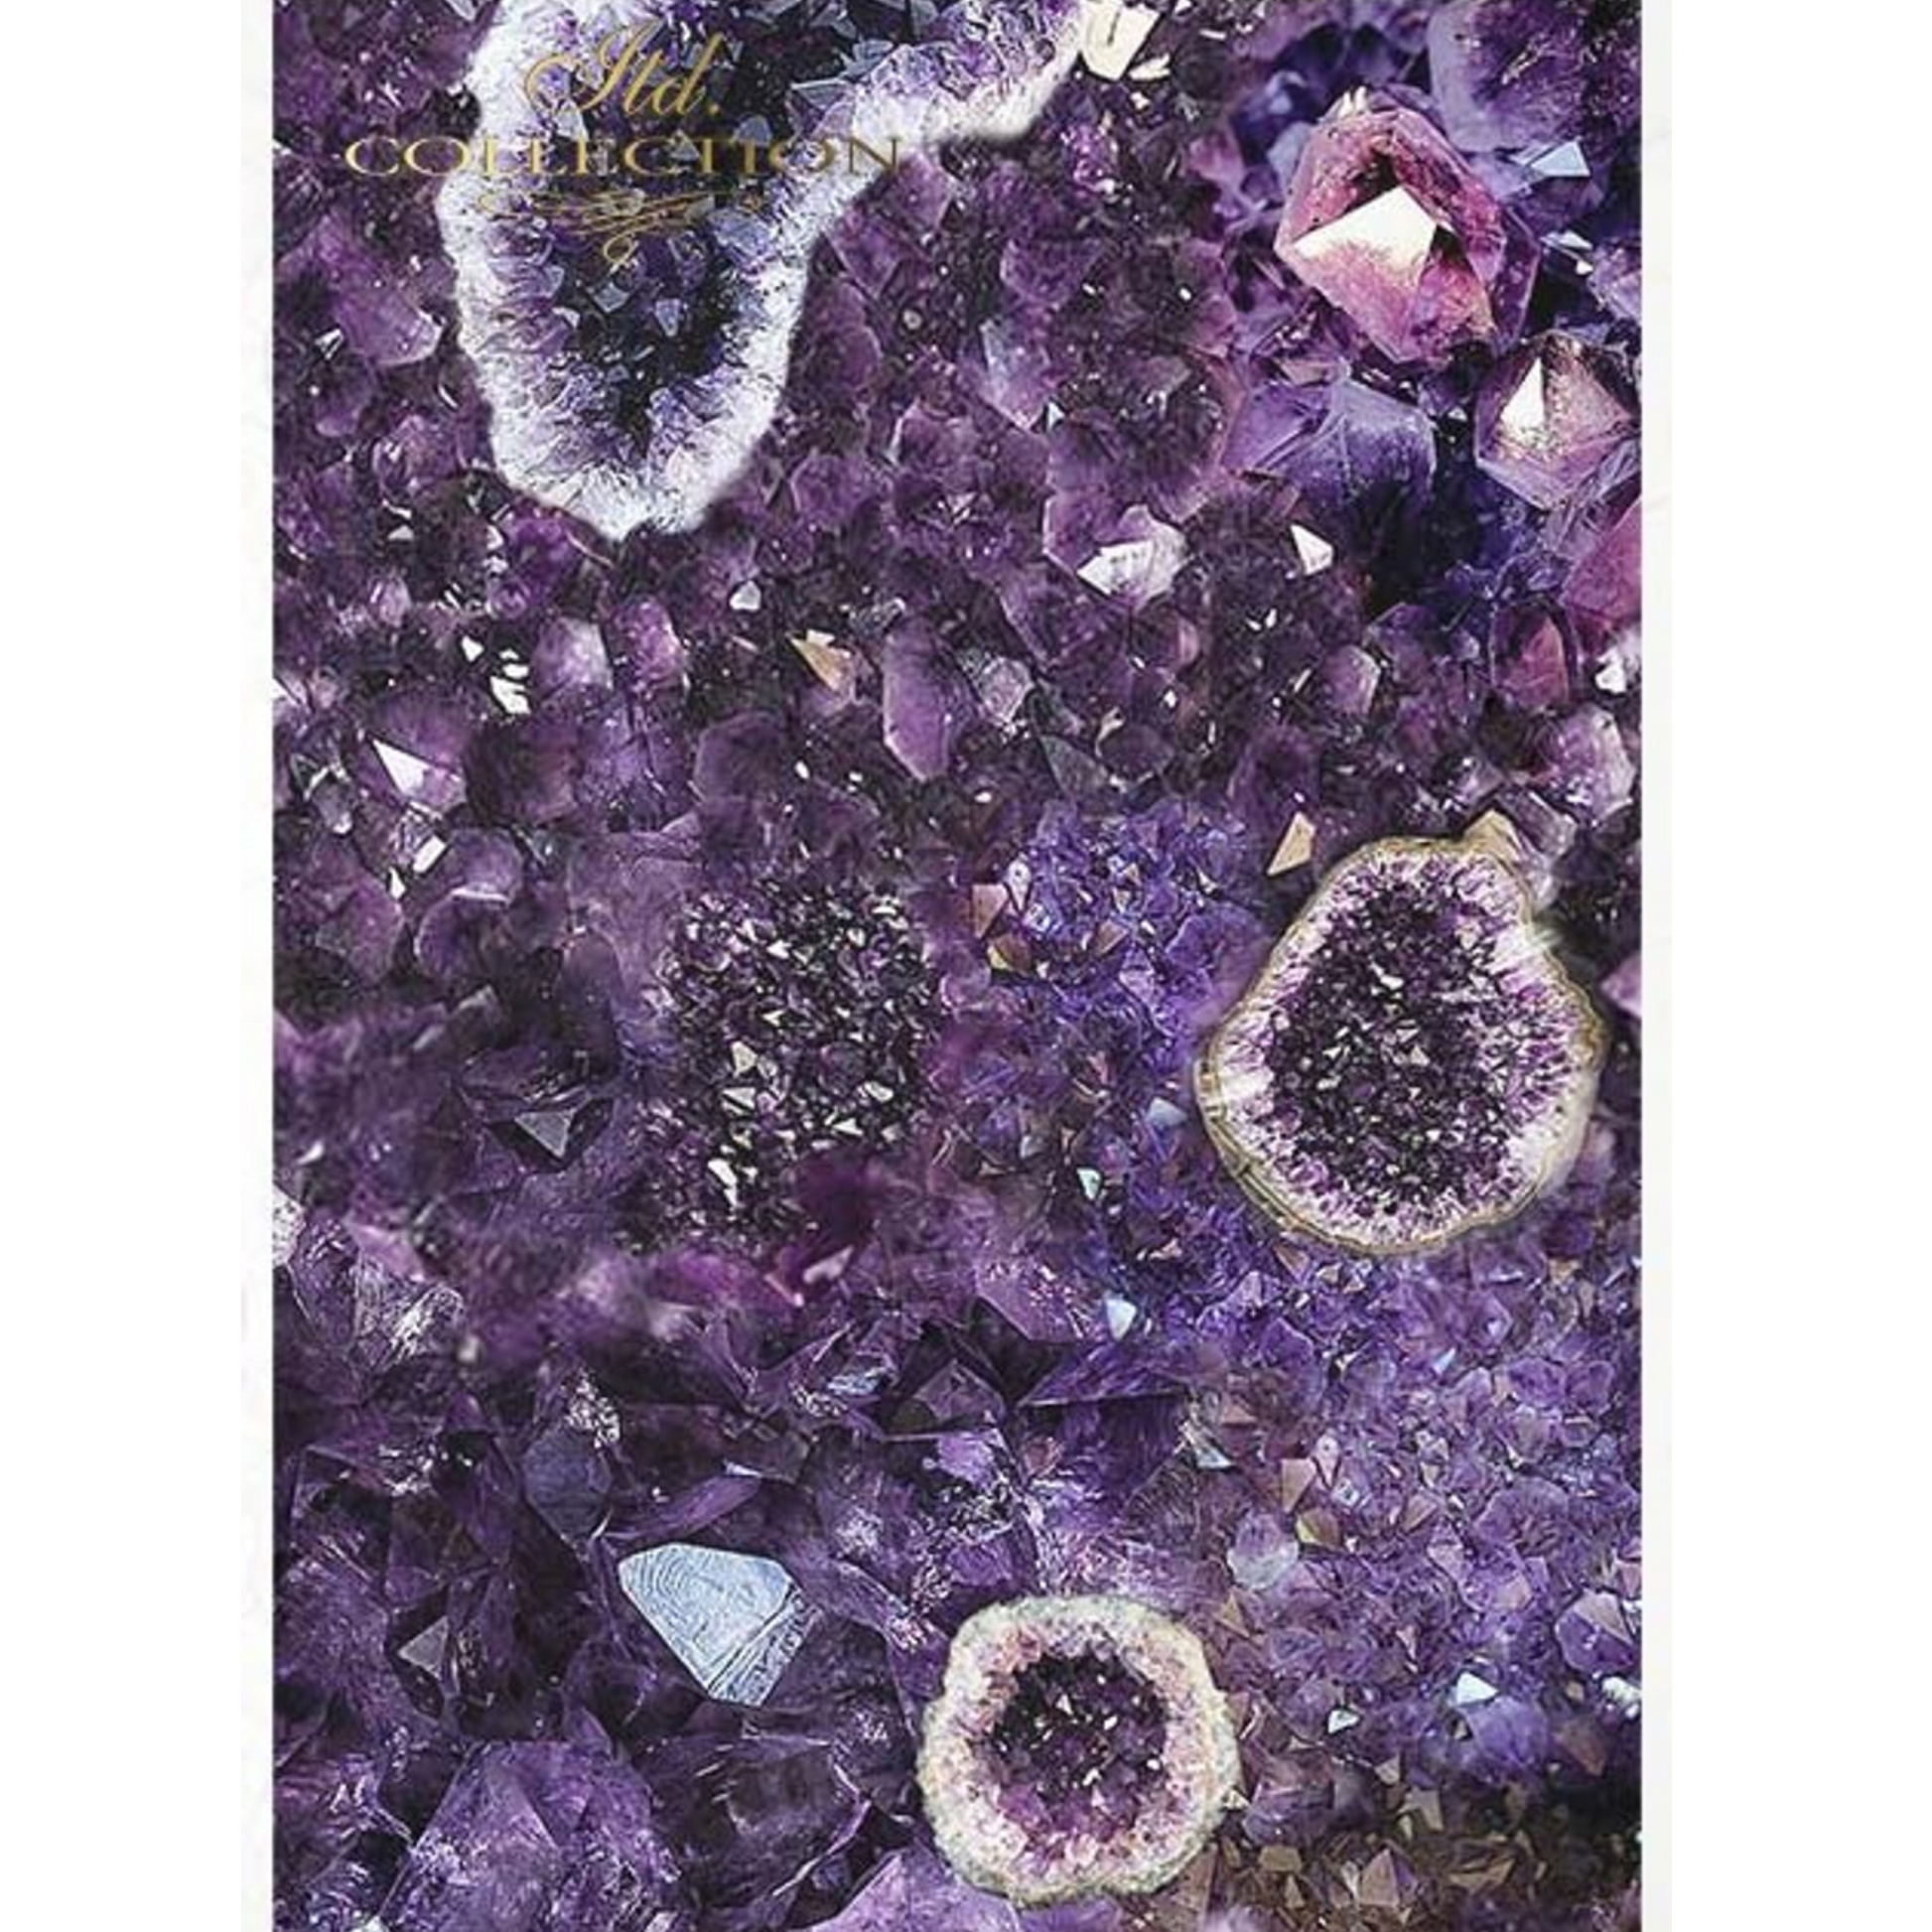 "Gemstones" decoupage rice paper 11 sheet set in size A4 available at Milton's Daughter. Page 3 of 11 sheet set.